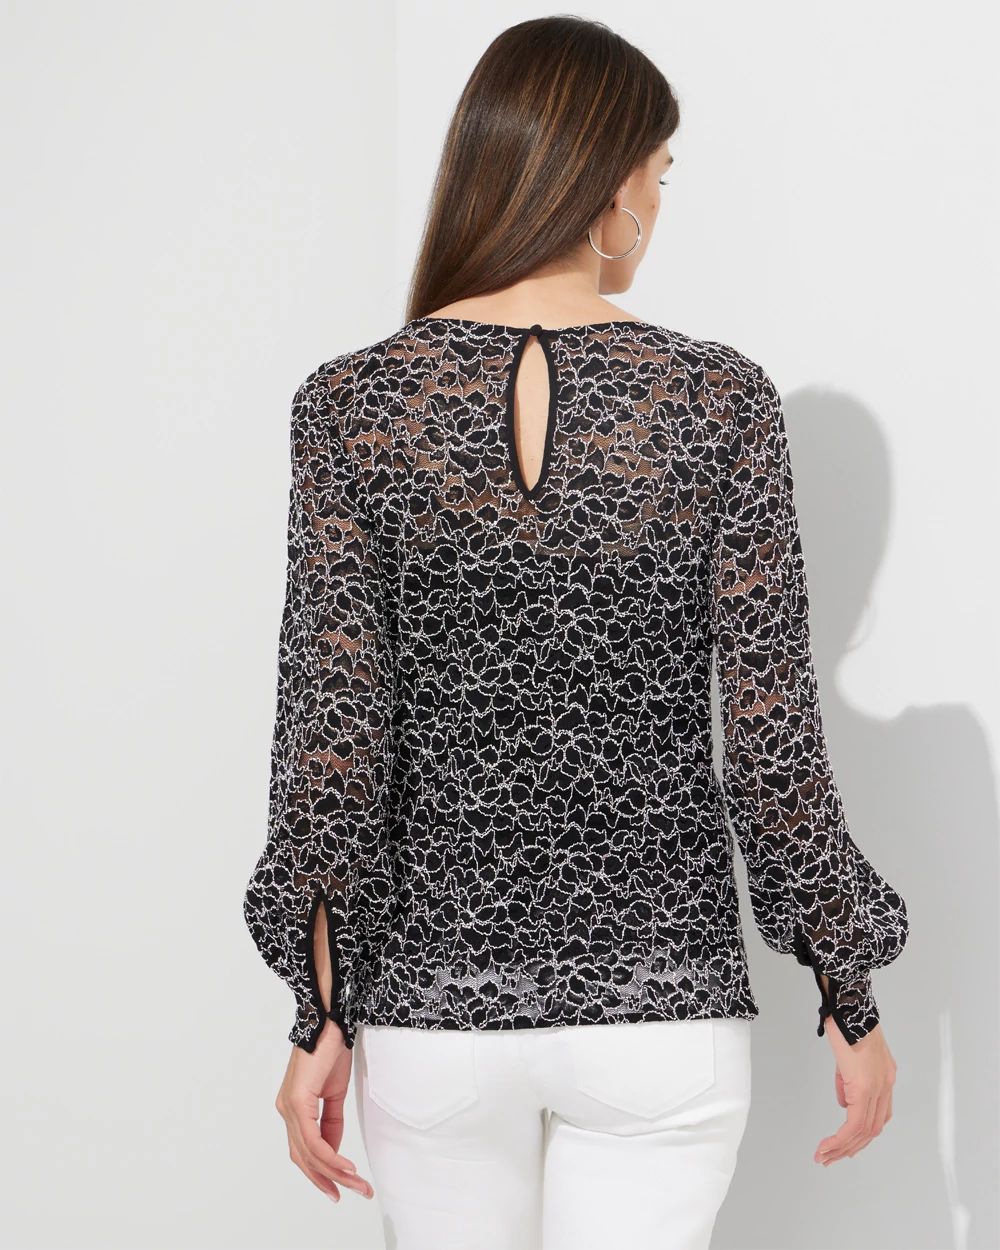 Outlet WHBM Raschel Lace Top click to view larger image.